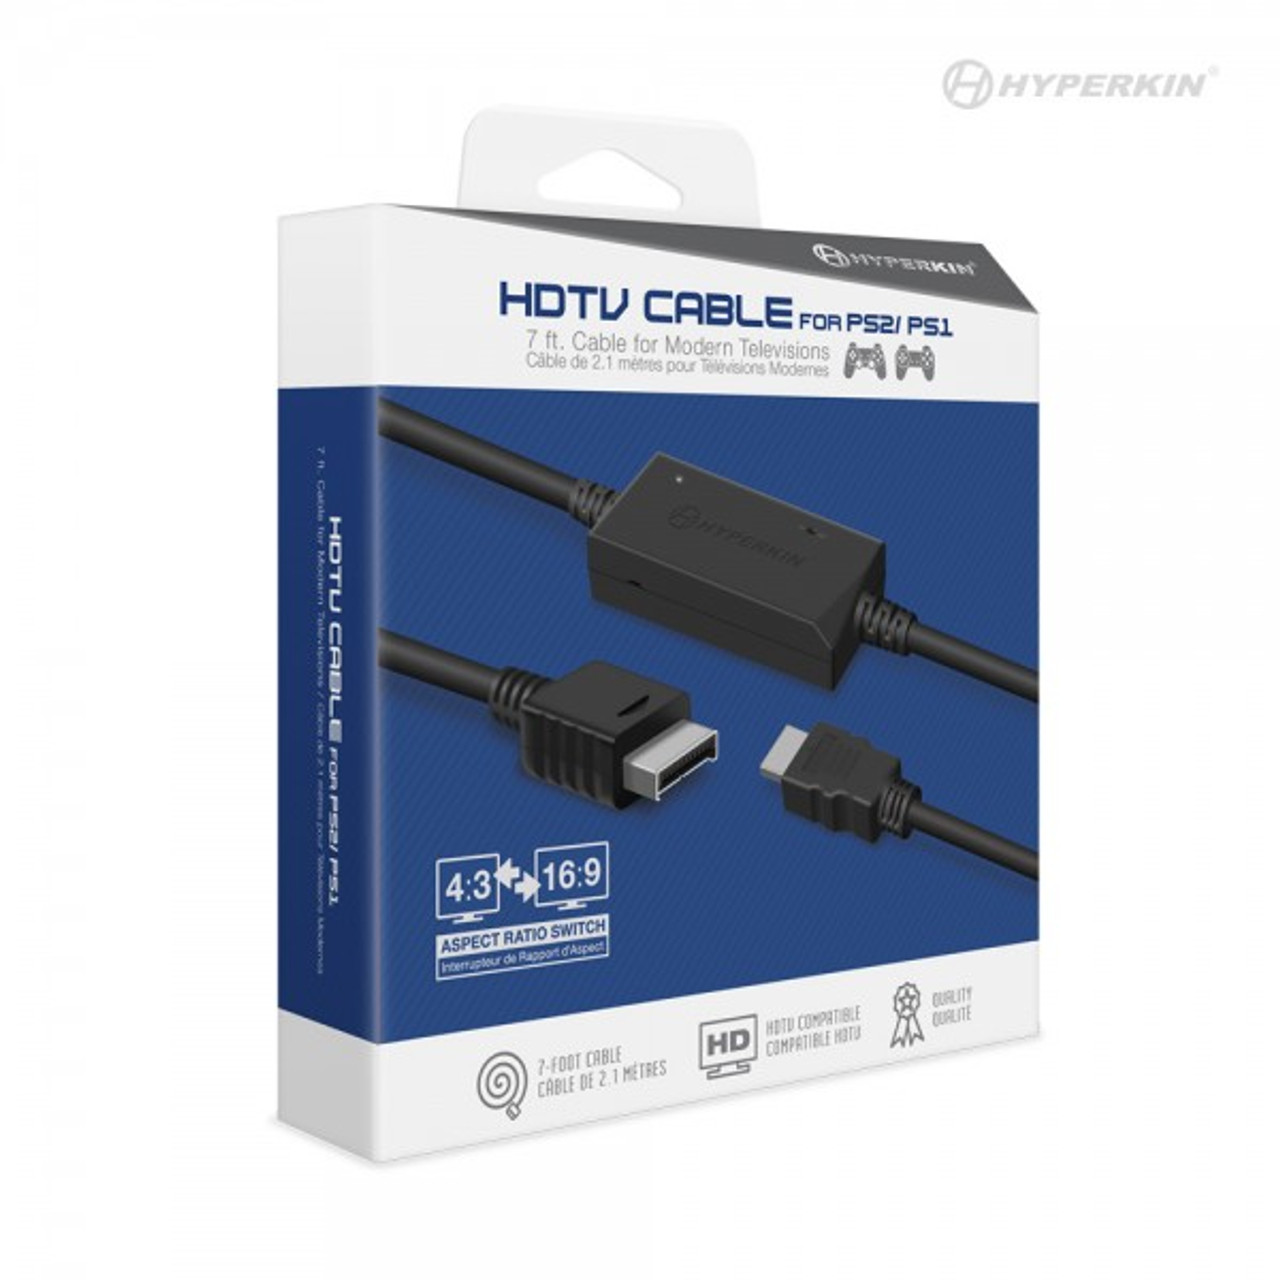 PS2 to HDMI Adapter PS2 HDMI Cable PS2 to HDMI Converter Support HDMI  4:3/16:9 Switch, Works for Playstation 1/Playstation 2 and PS3. PS1 Adapter